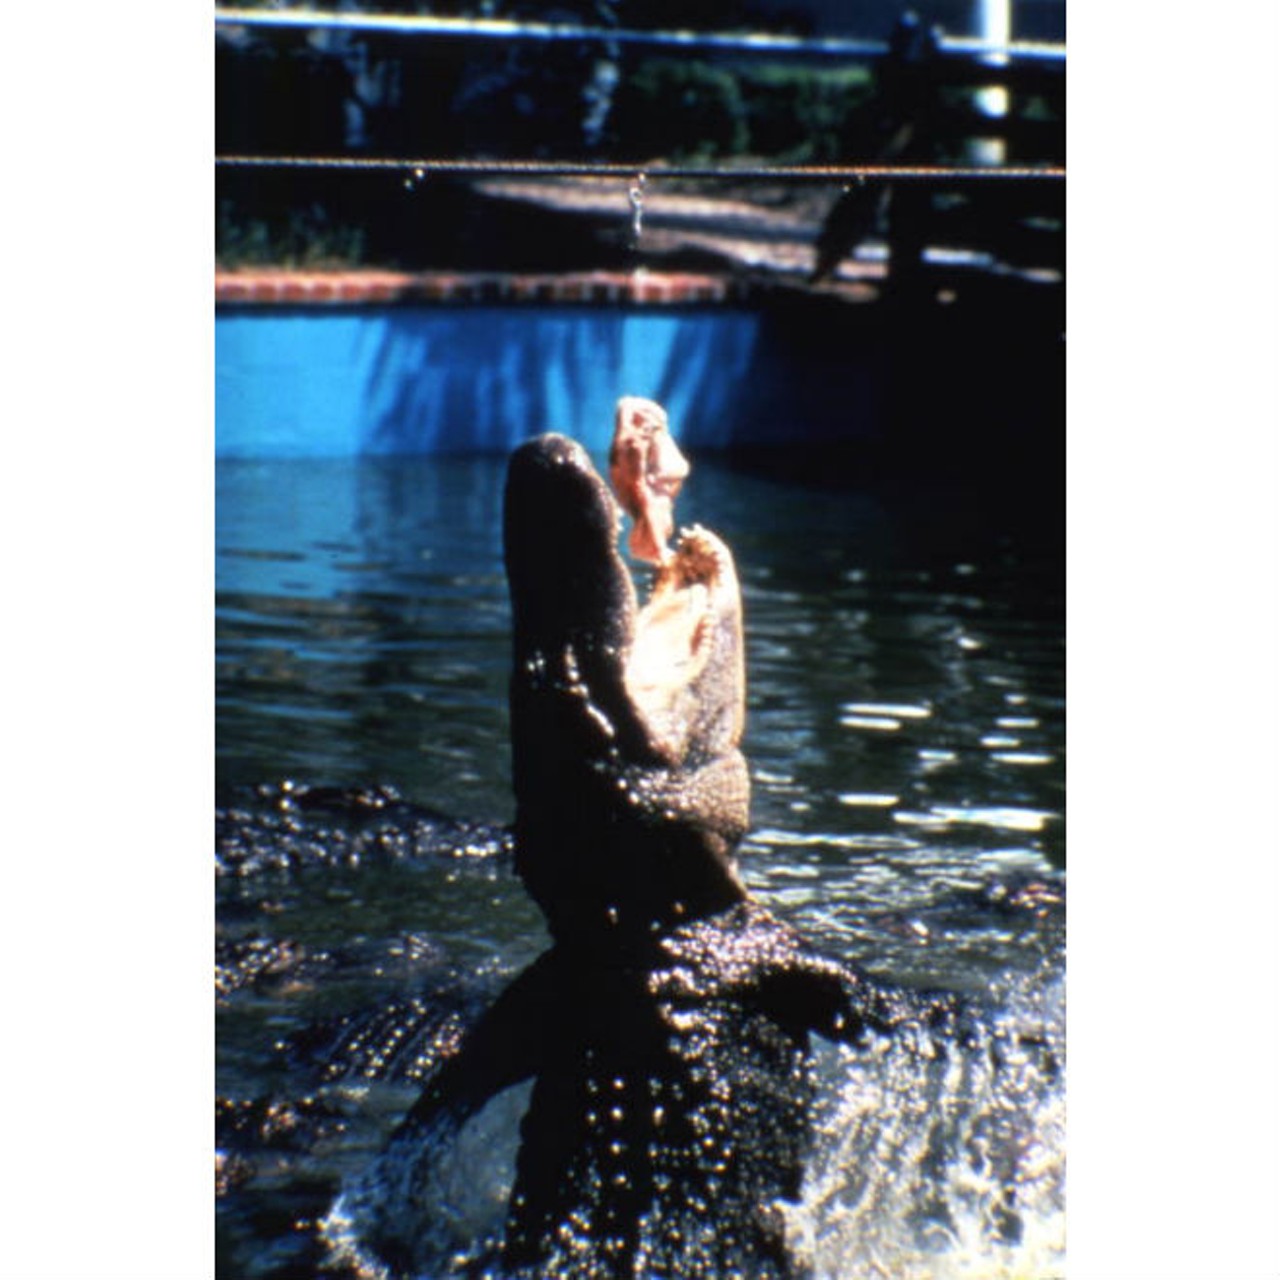 View showing an alligator leaping out of the water for food on a rope.State Archives of Florida, Florida Memory